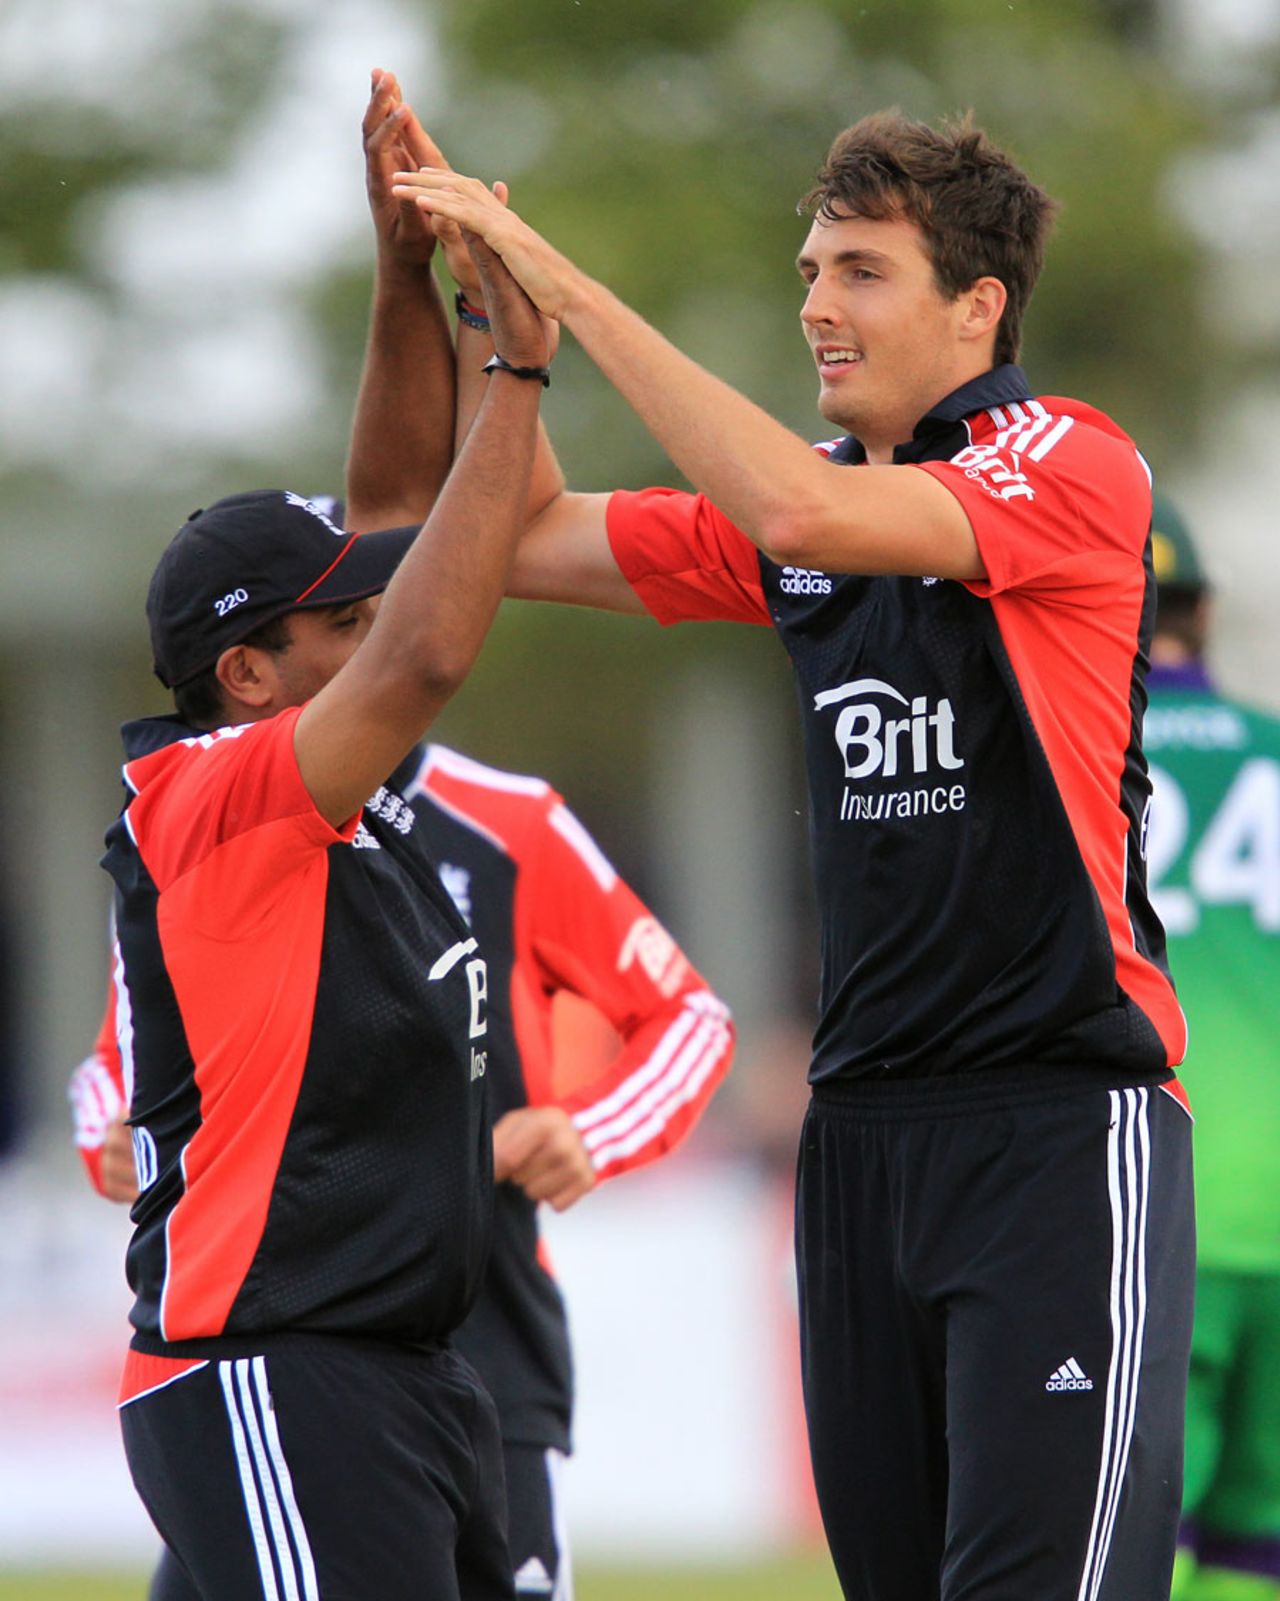 Steven Finn claimed two early wickets before the rain interrupted at Clontarf, Ireland v England, only ODI, Clontarf, August 25, 2011